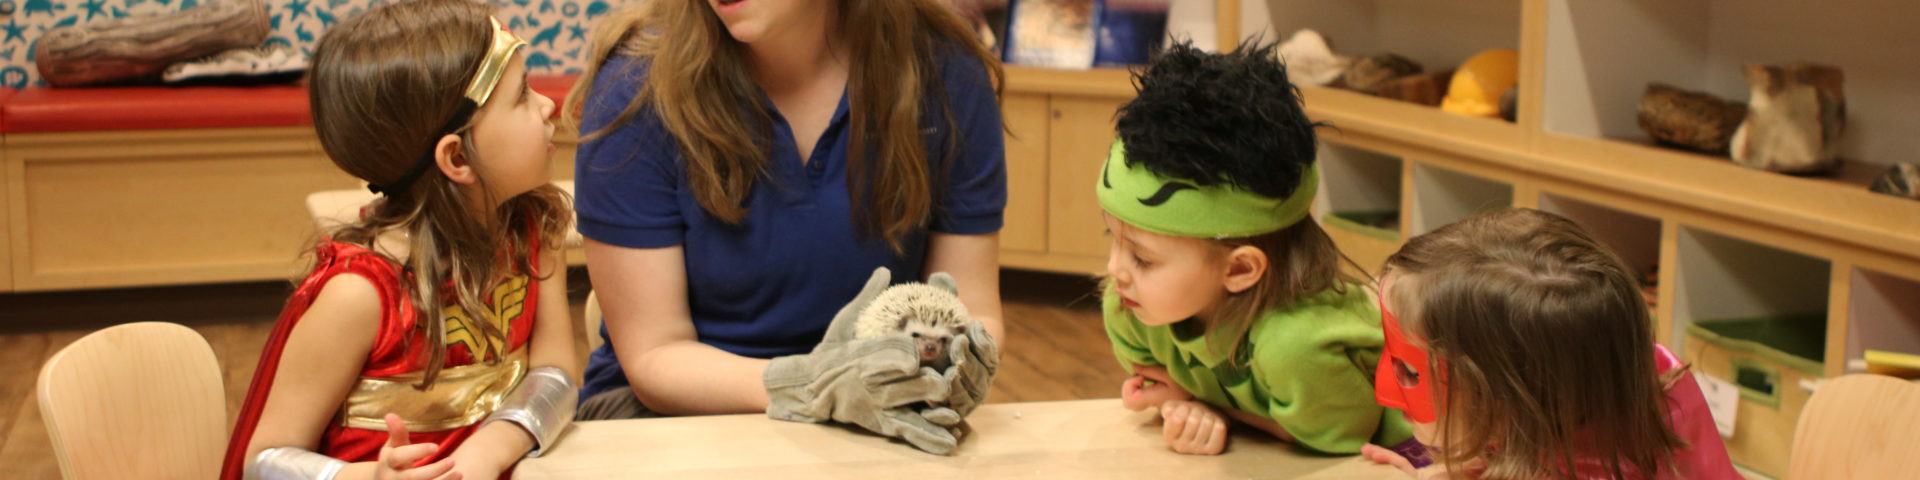 kids in costume with educator and hedgehog